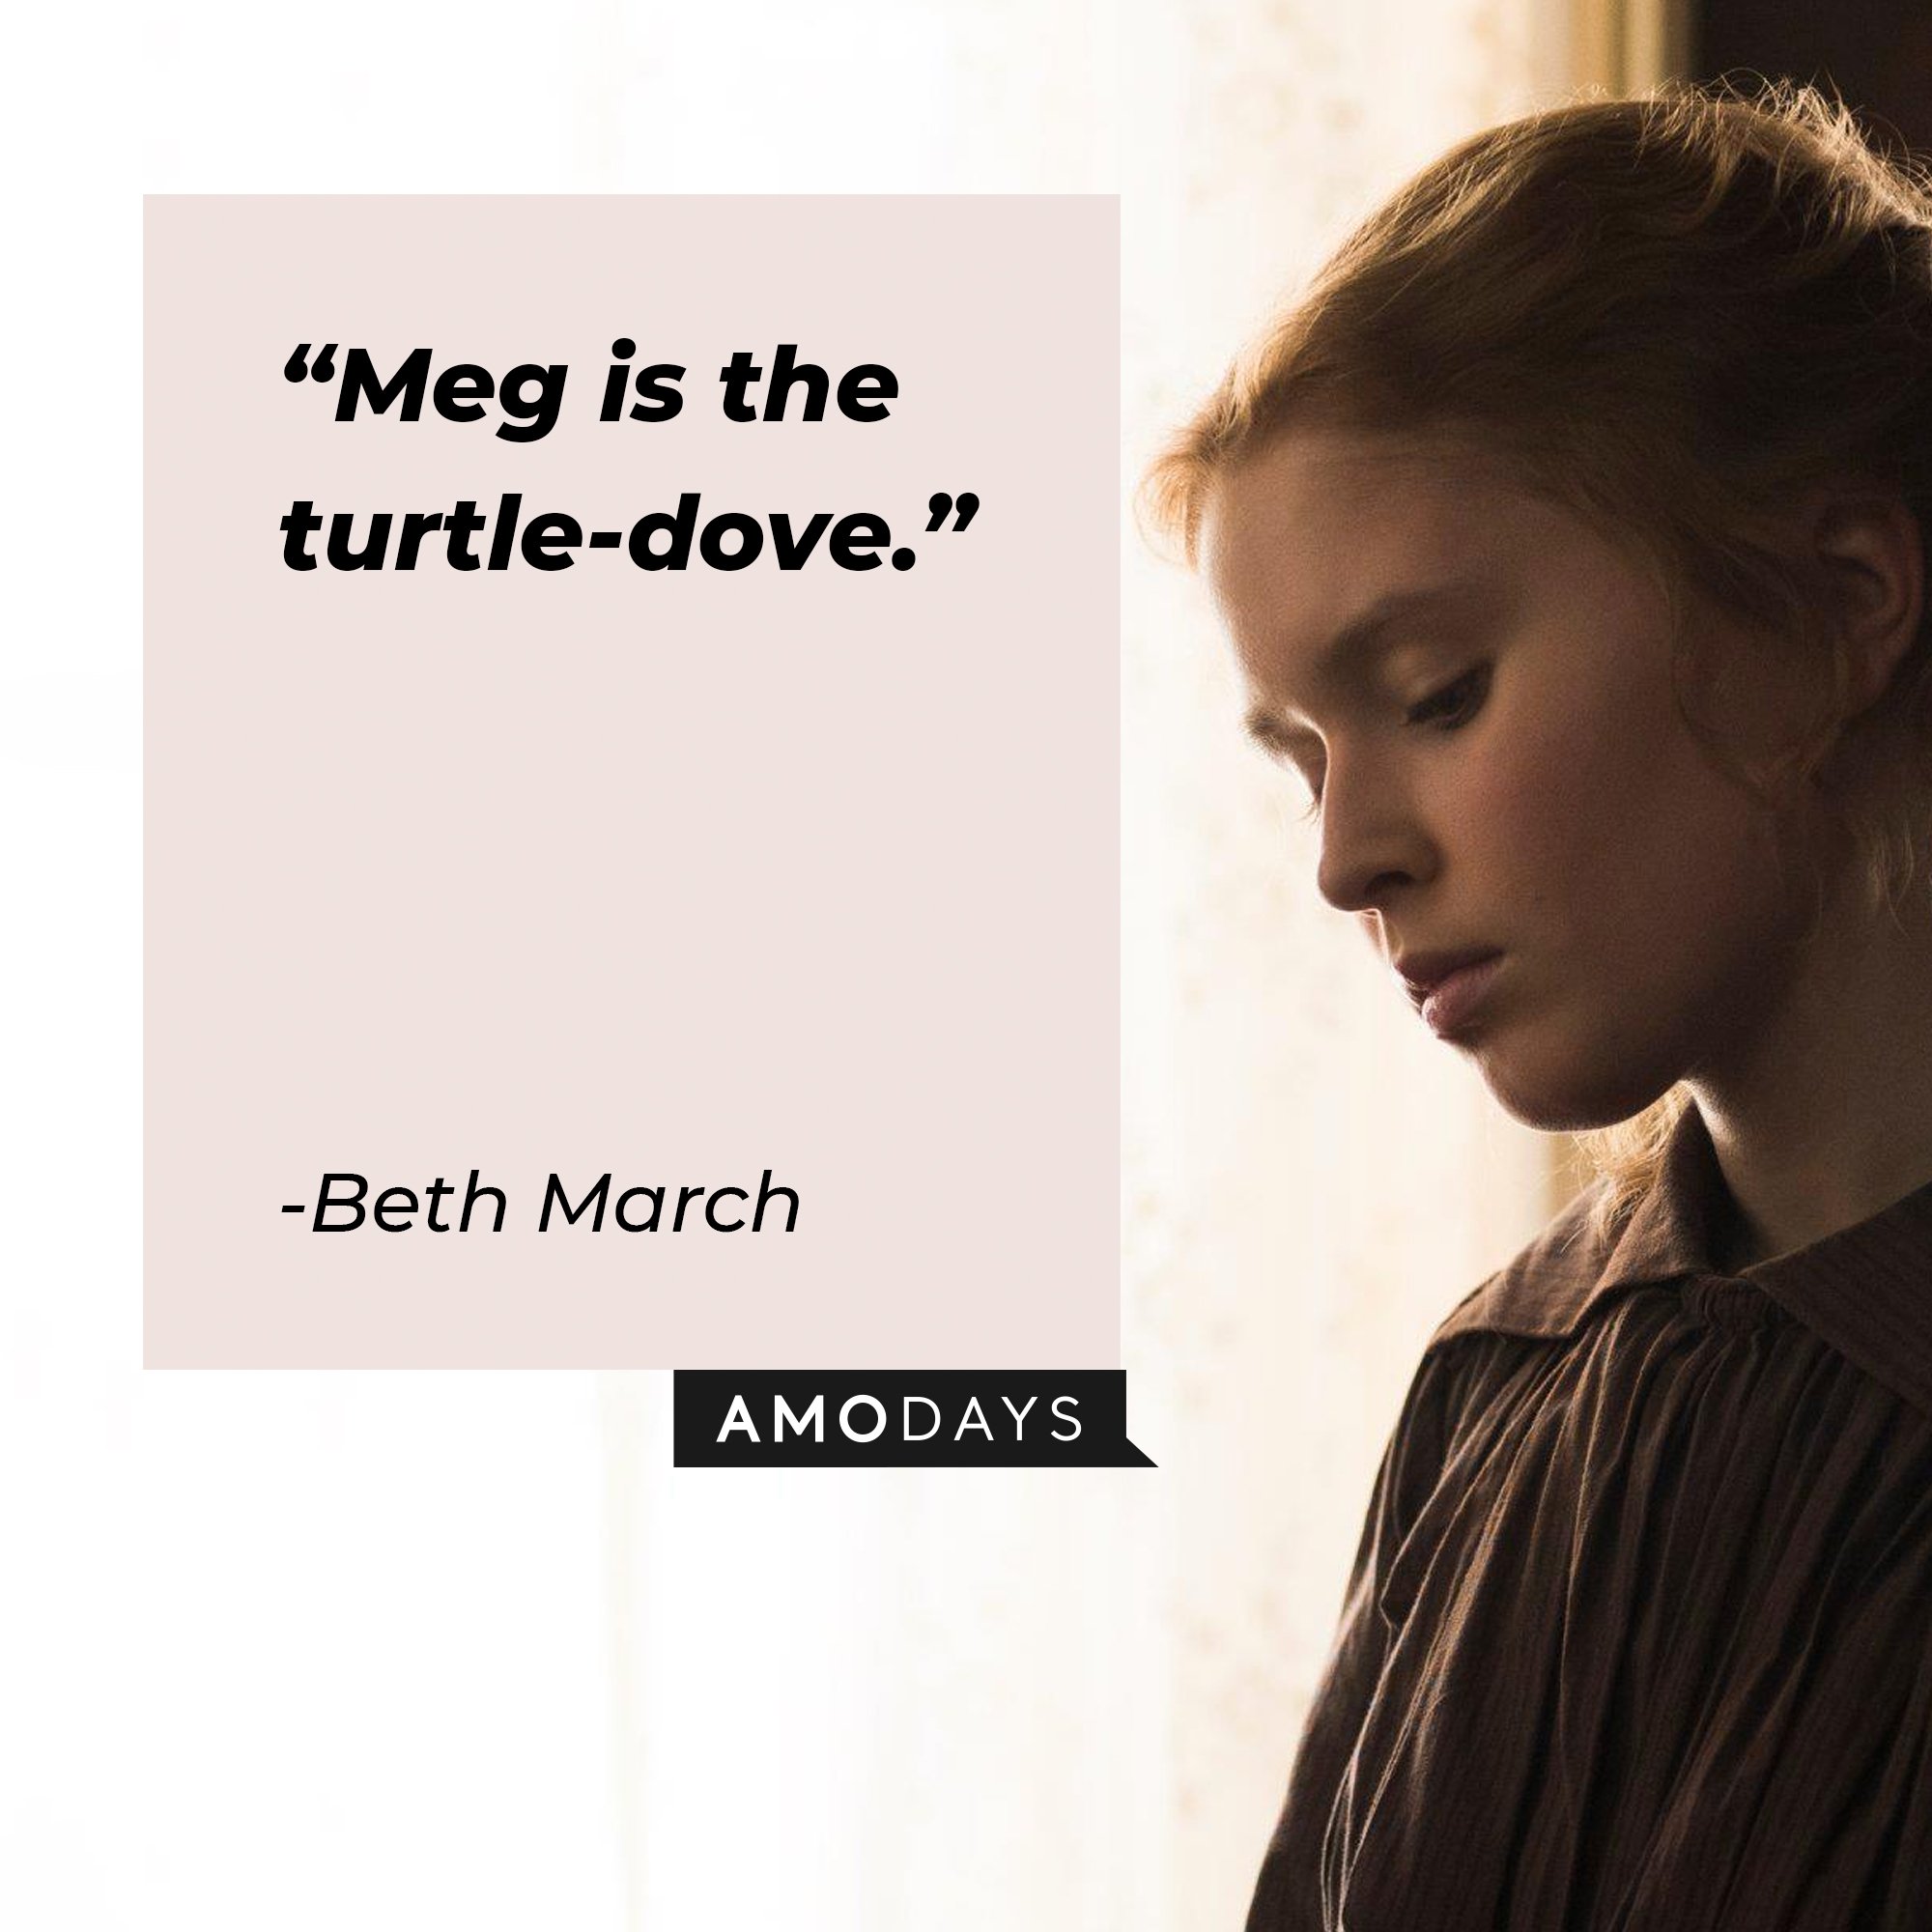 Beth March’s quote: "Meg is the turtle-dove." | Image: AmoDays